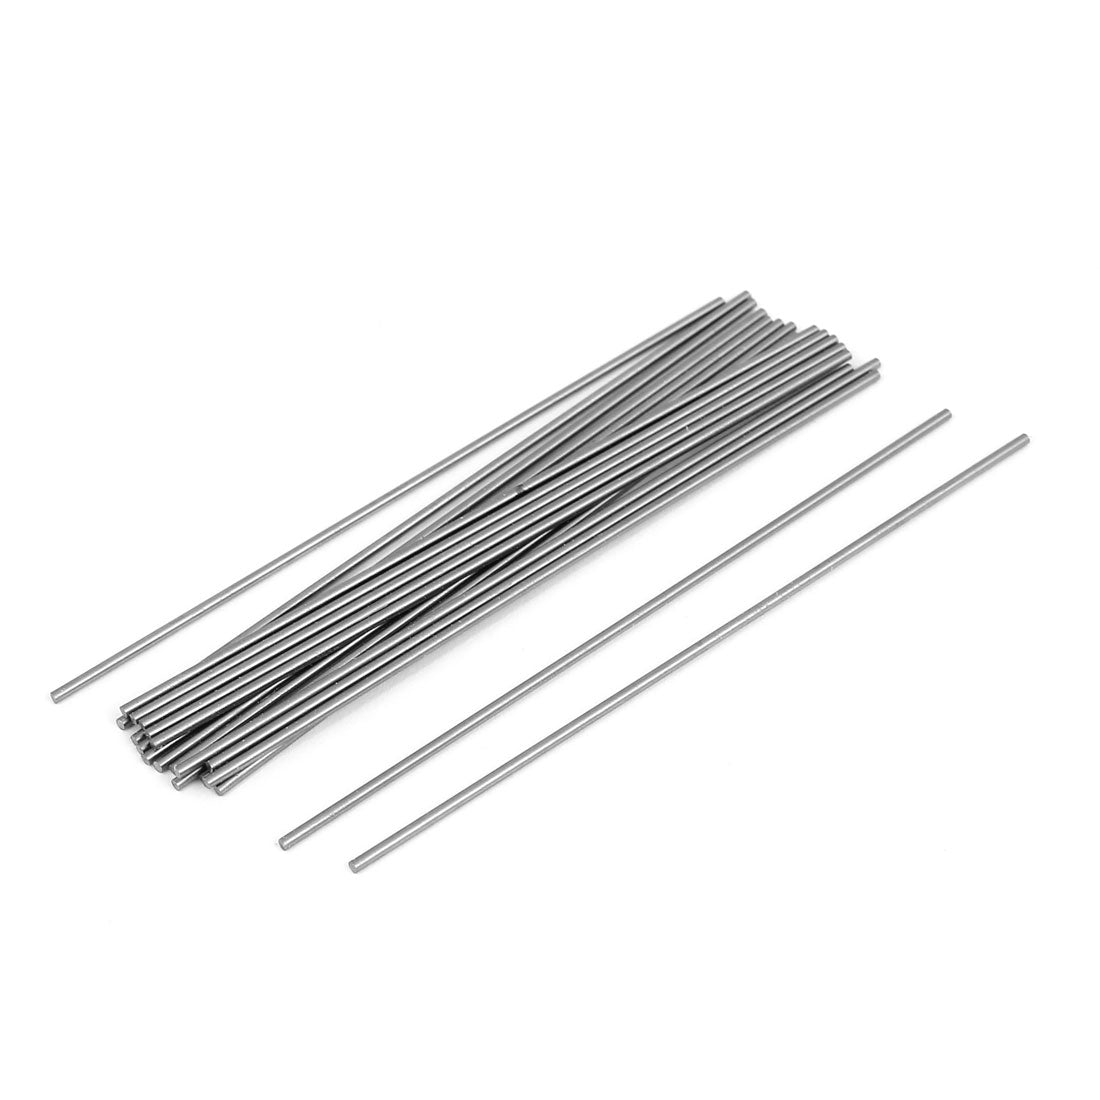 uxcell Uxcell 20pcs HSS High Speed Steel Turning Carbide Bars for CNC Lathe 1.4mmx100mm